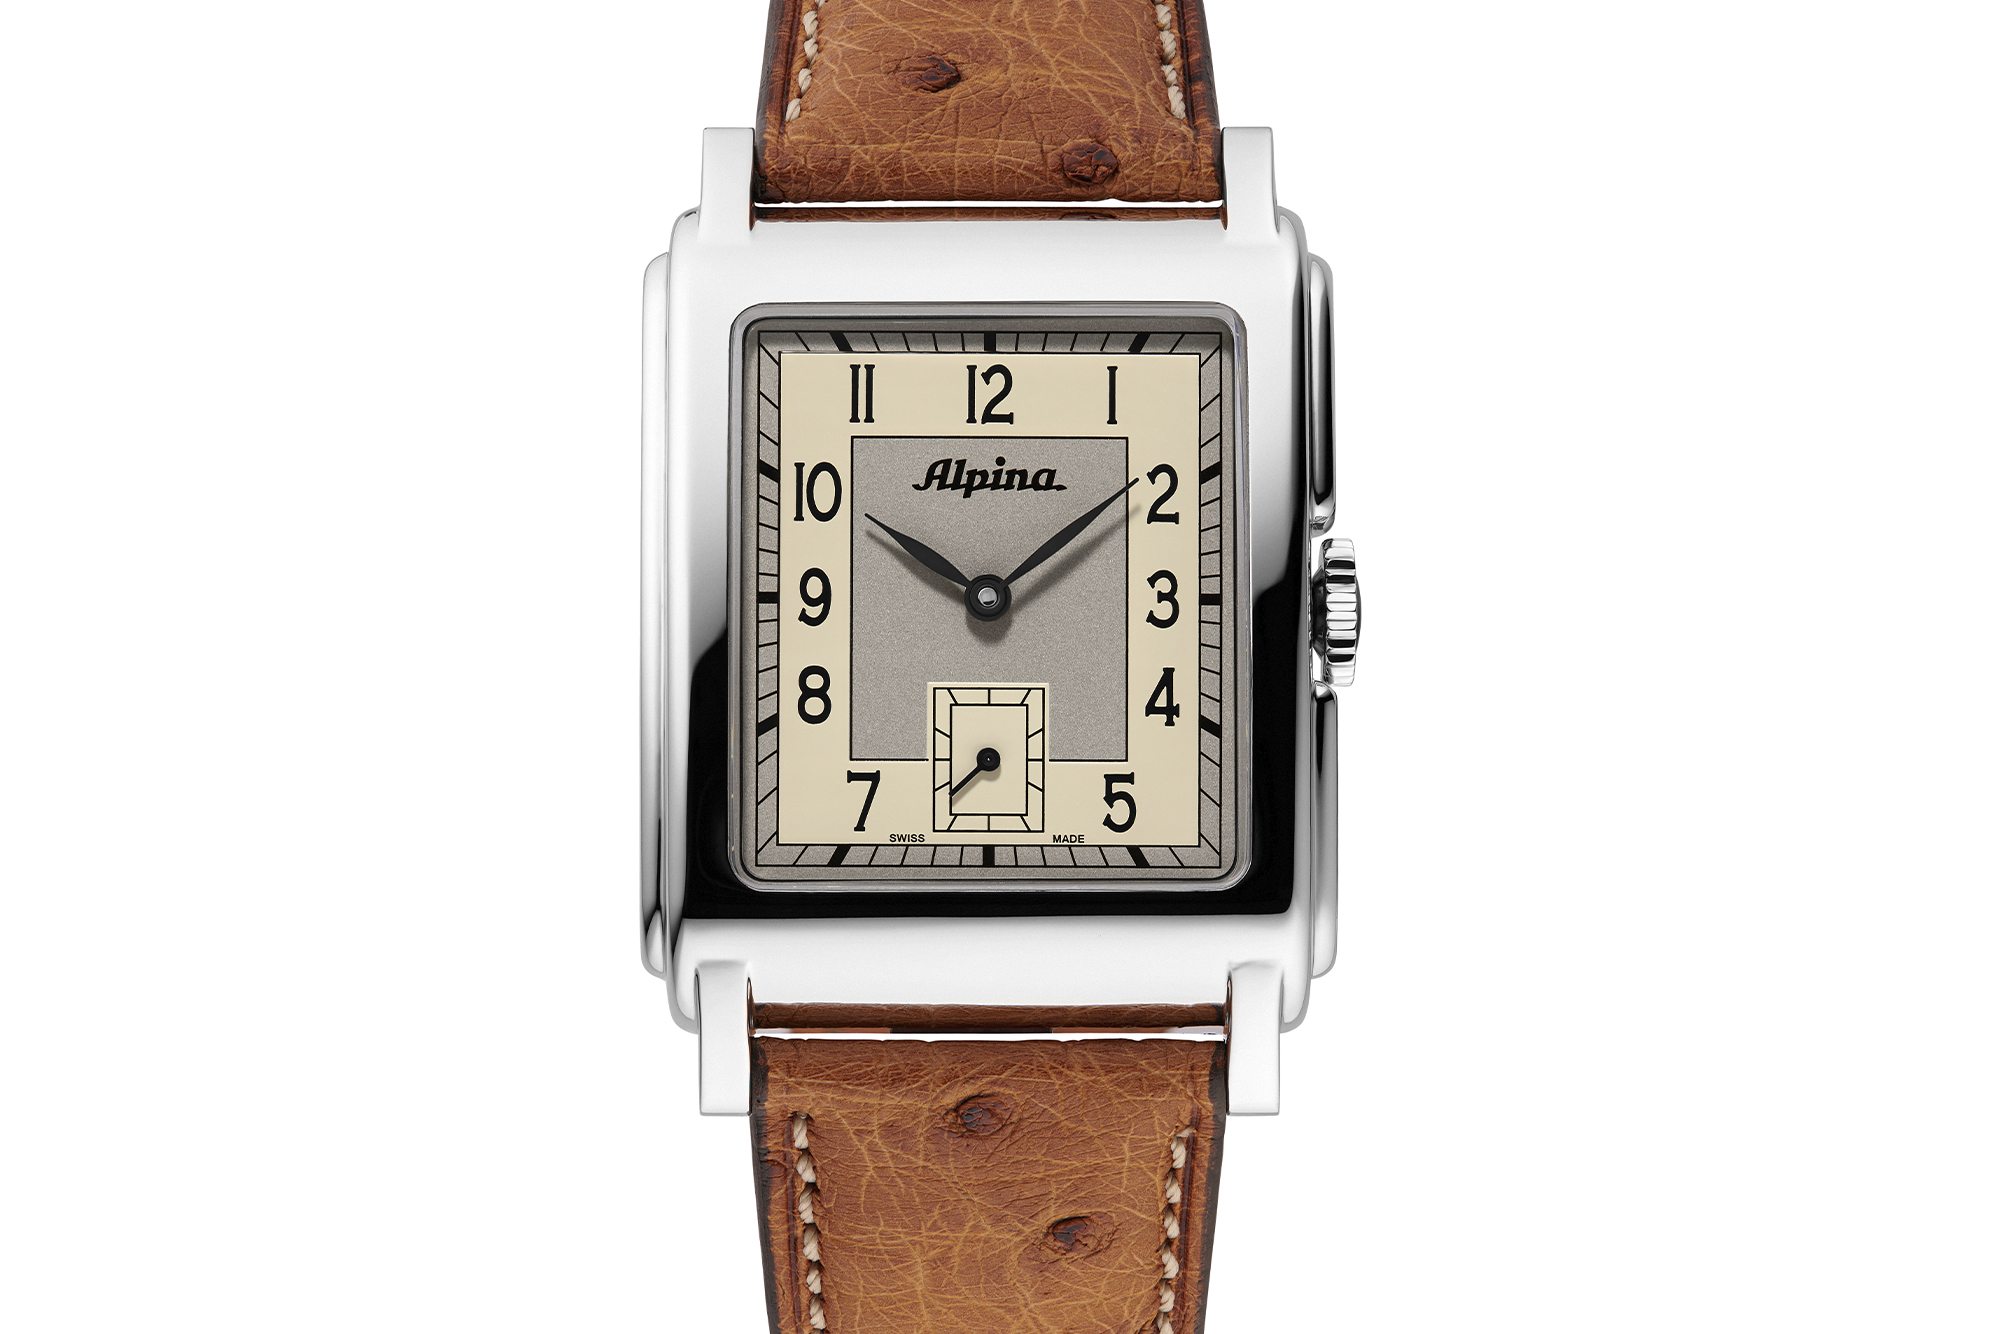 Heritage Carrée Automatic 140 Years